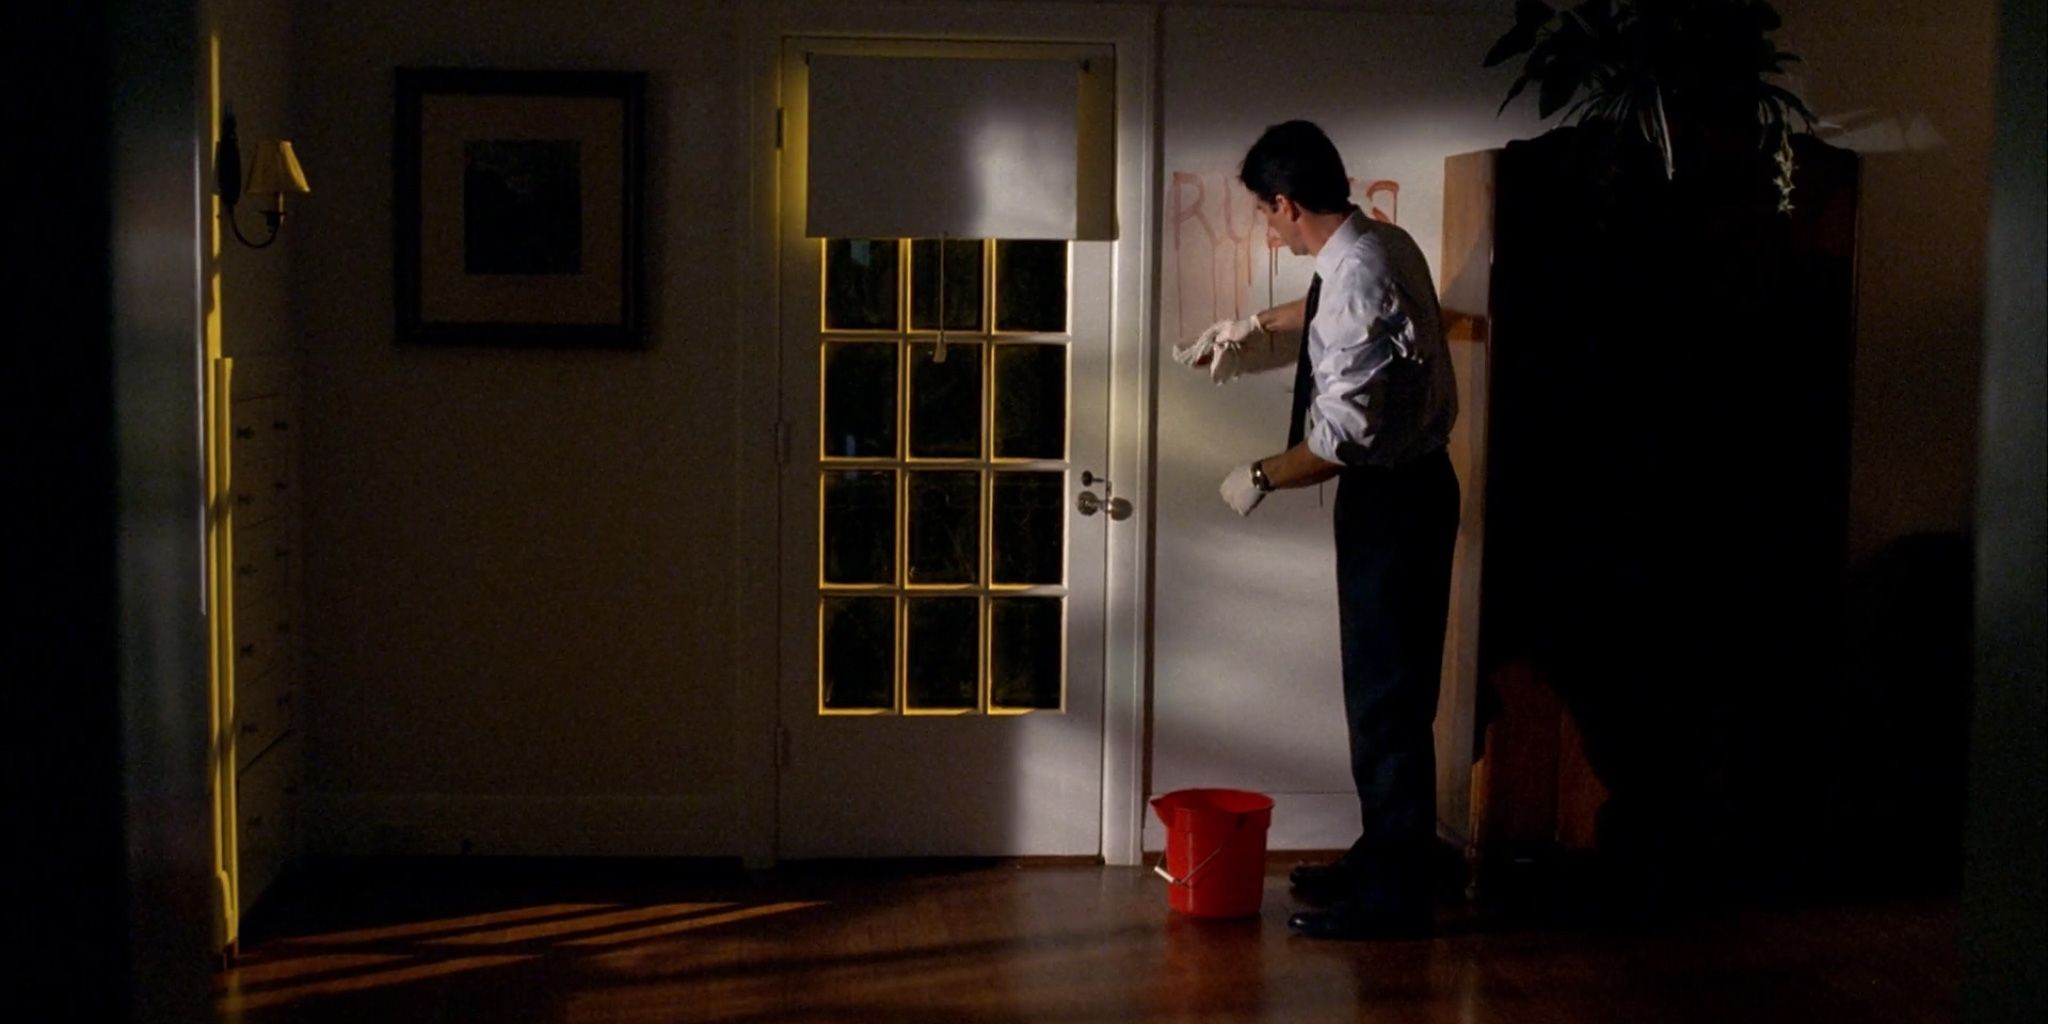 Hotch painting a wall in Criminal Minds: The Fisher King Part 2